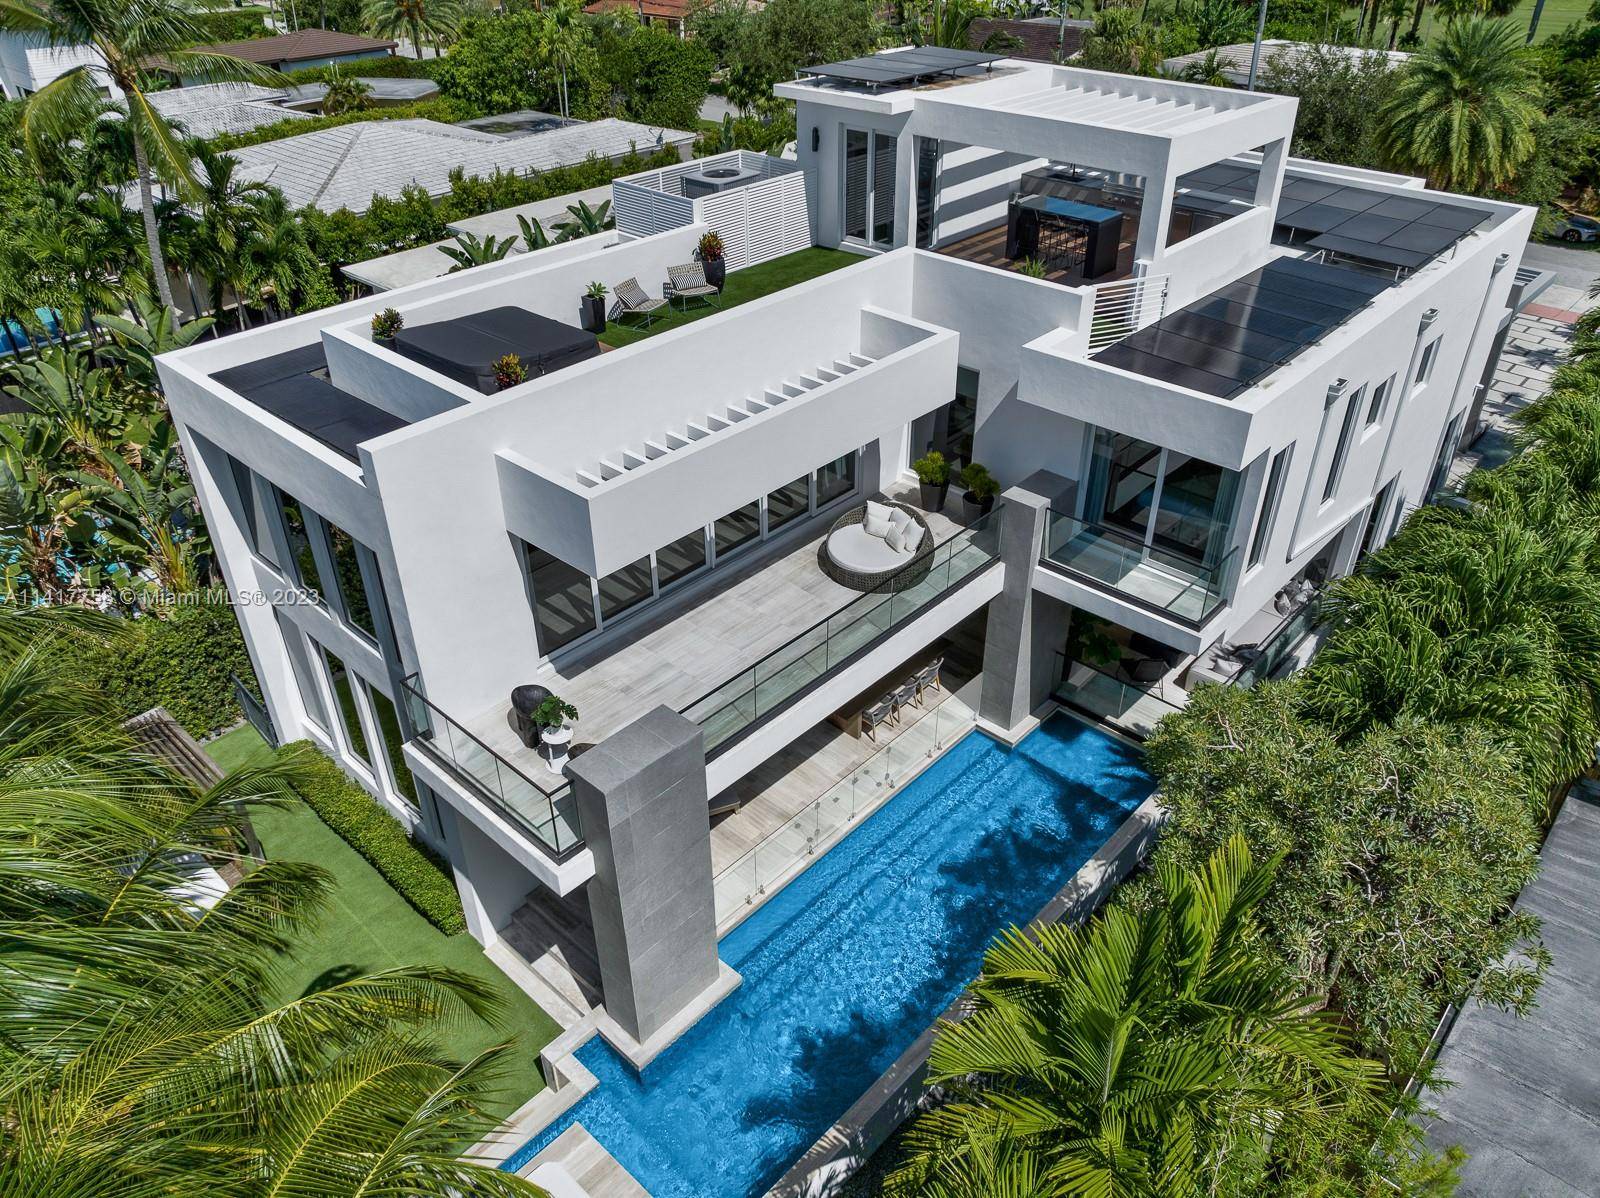 Step Inside With Me ! Presenting a modern waterfront custom home in Miami Beach s guard gated Normandy Isle.